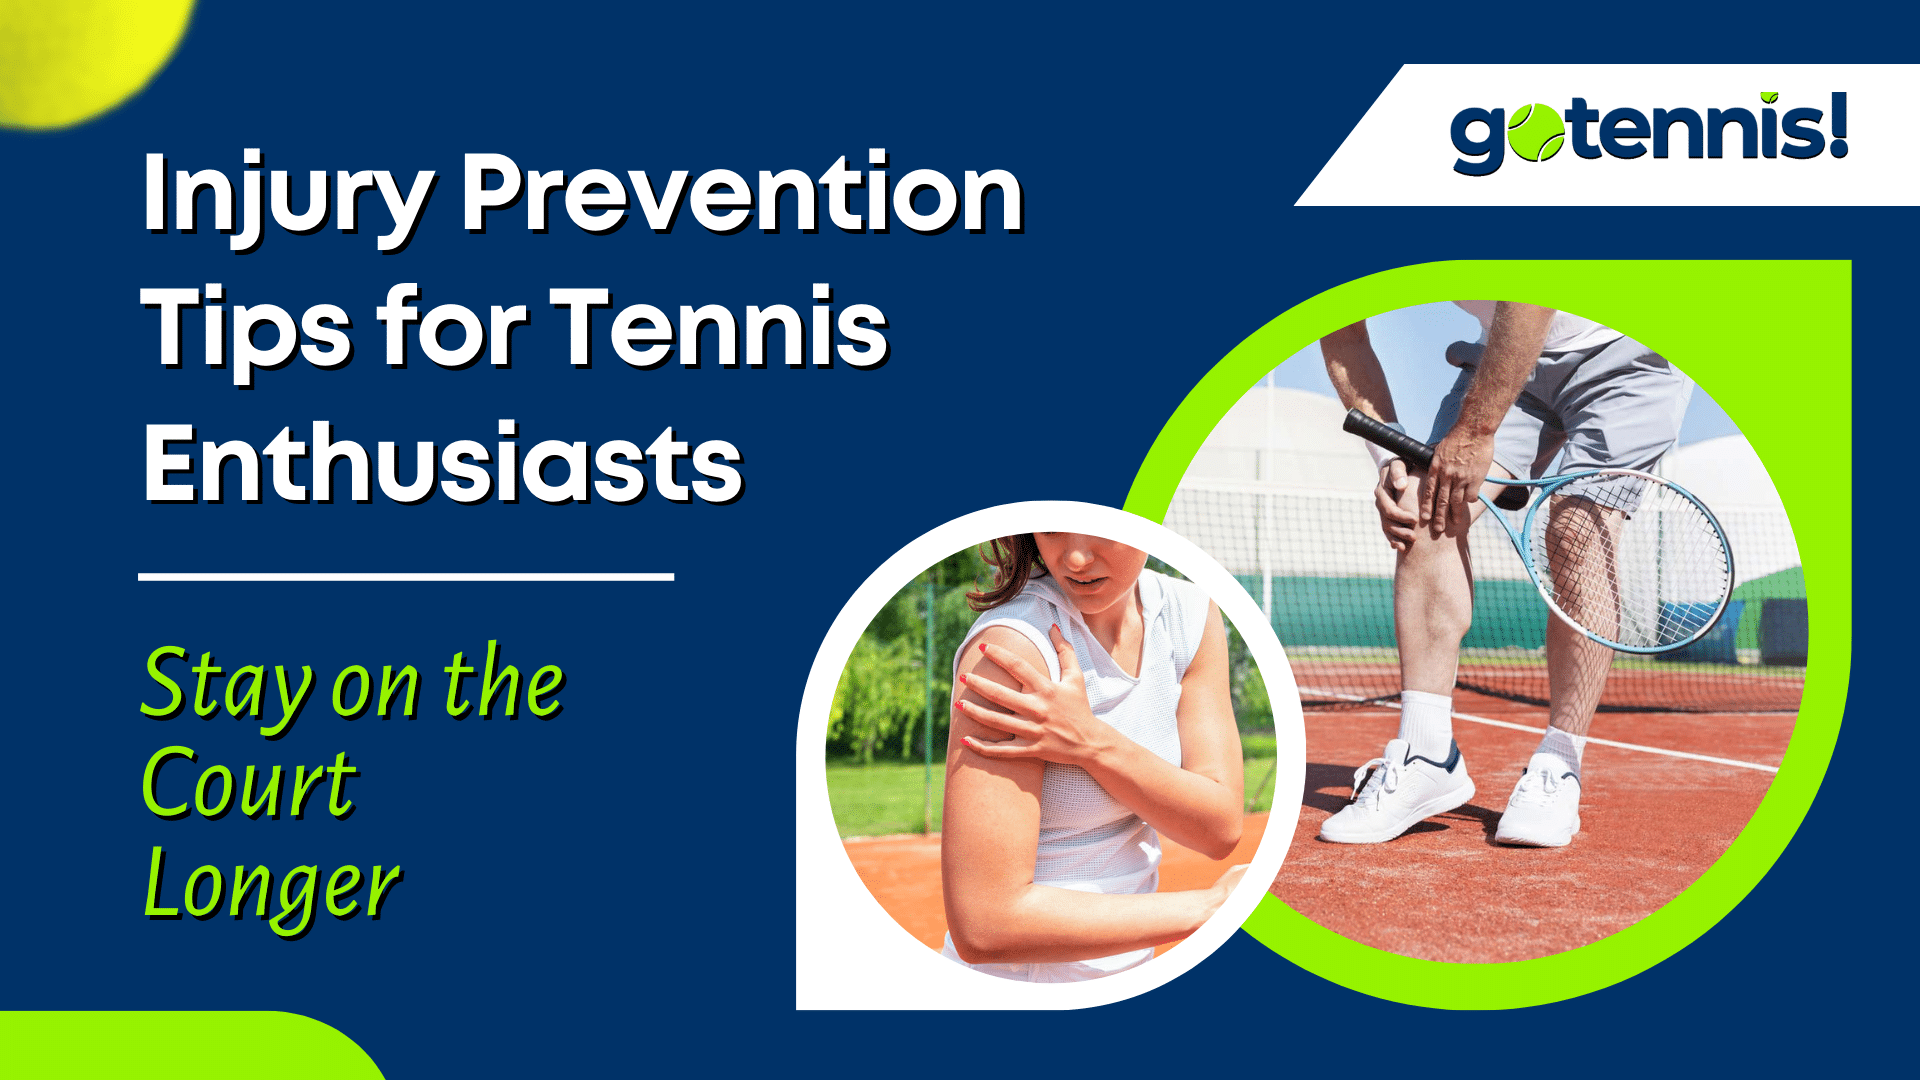 letsGoTennis post image for "Injury Prevention Tips for Tennis Enthusiasts, Stay on the Court Longer_revised"